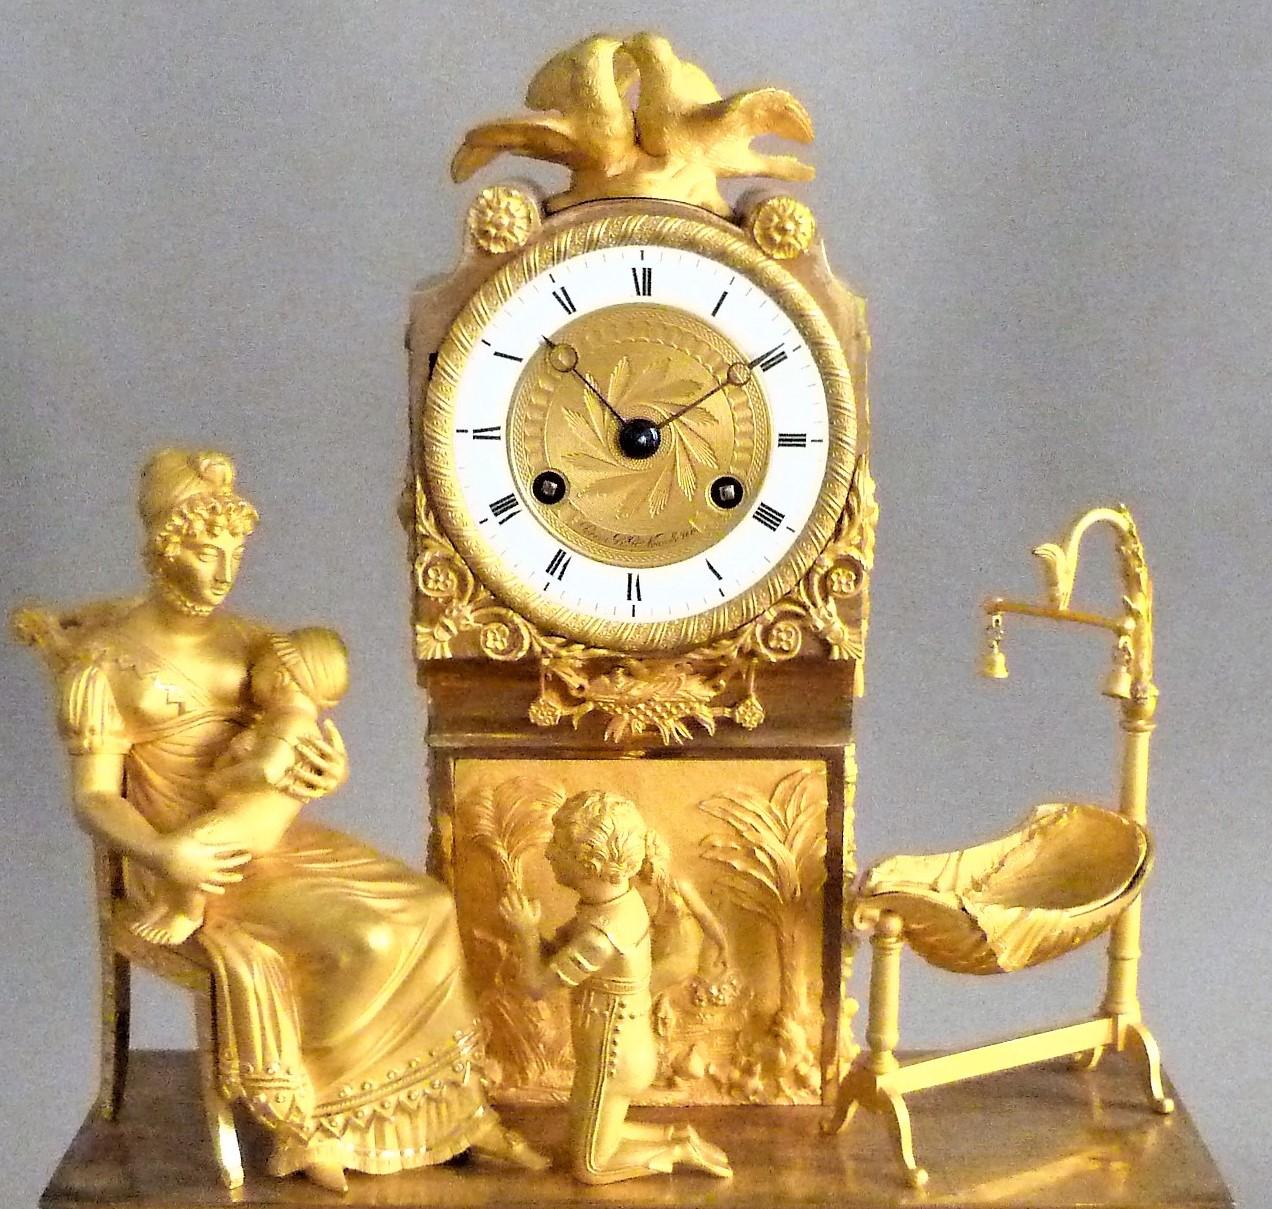 Beautiful and rare gilded bronze clock first third nineteenth time representing the birth of Henri d'Artois, grandson of France, Duke of Bordeaux, he is prince of the royal family of France. Partly enameled dial signed 